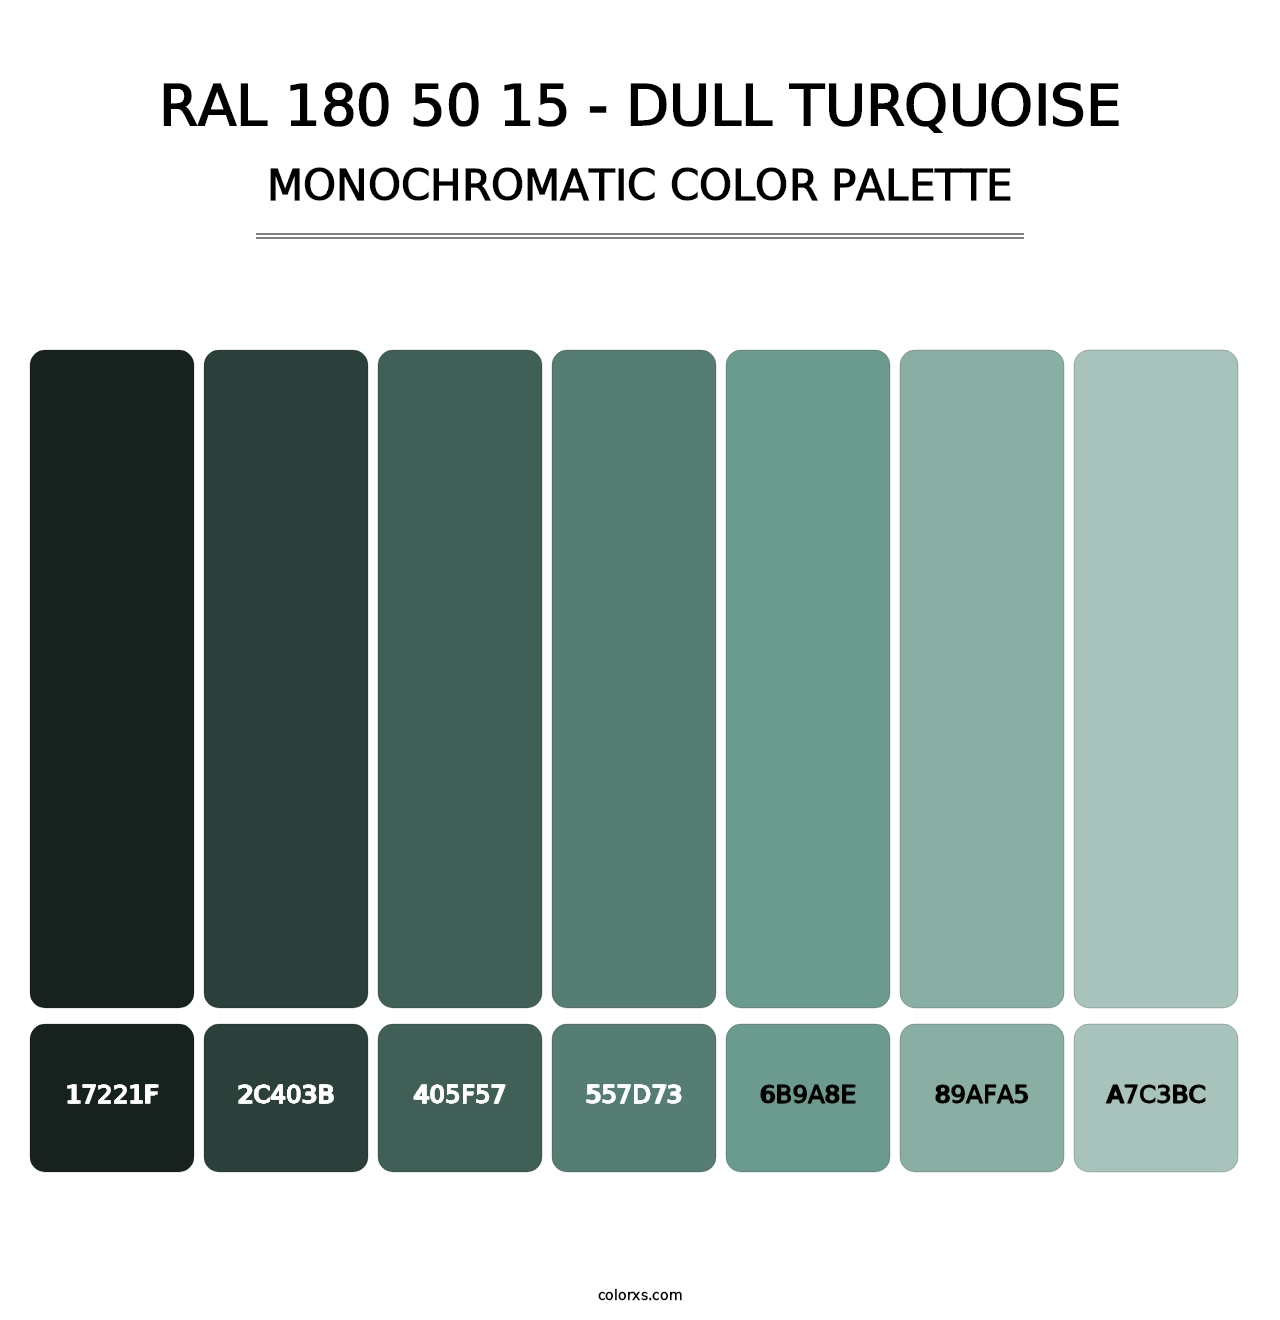 RAL 180 50 15 - Dull Turquoise - Monochromatic Color Palette